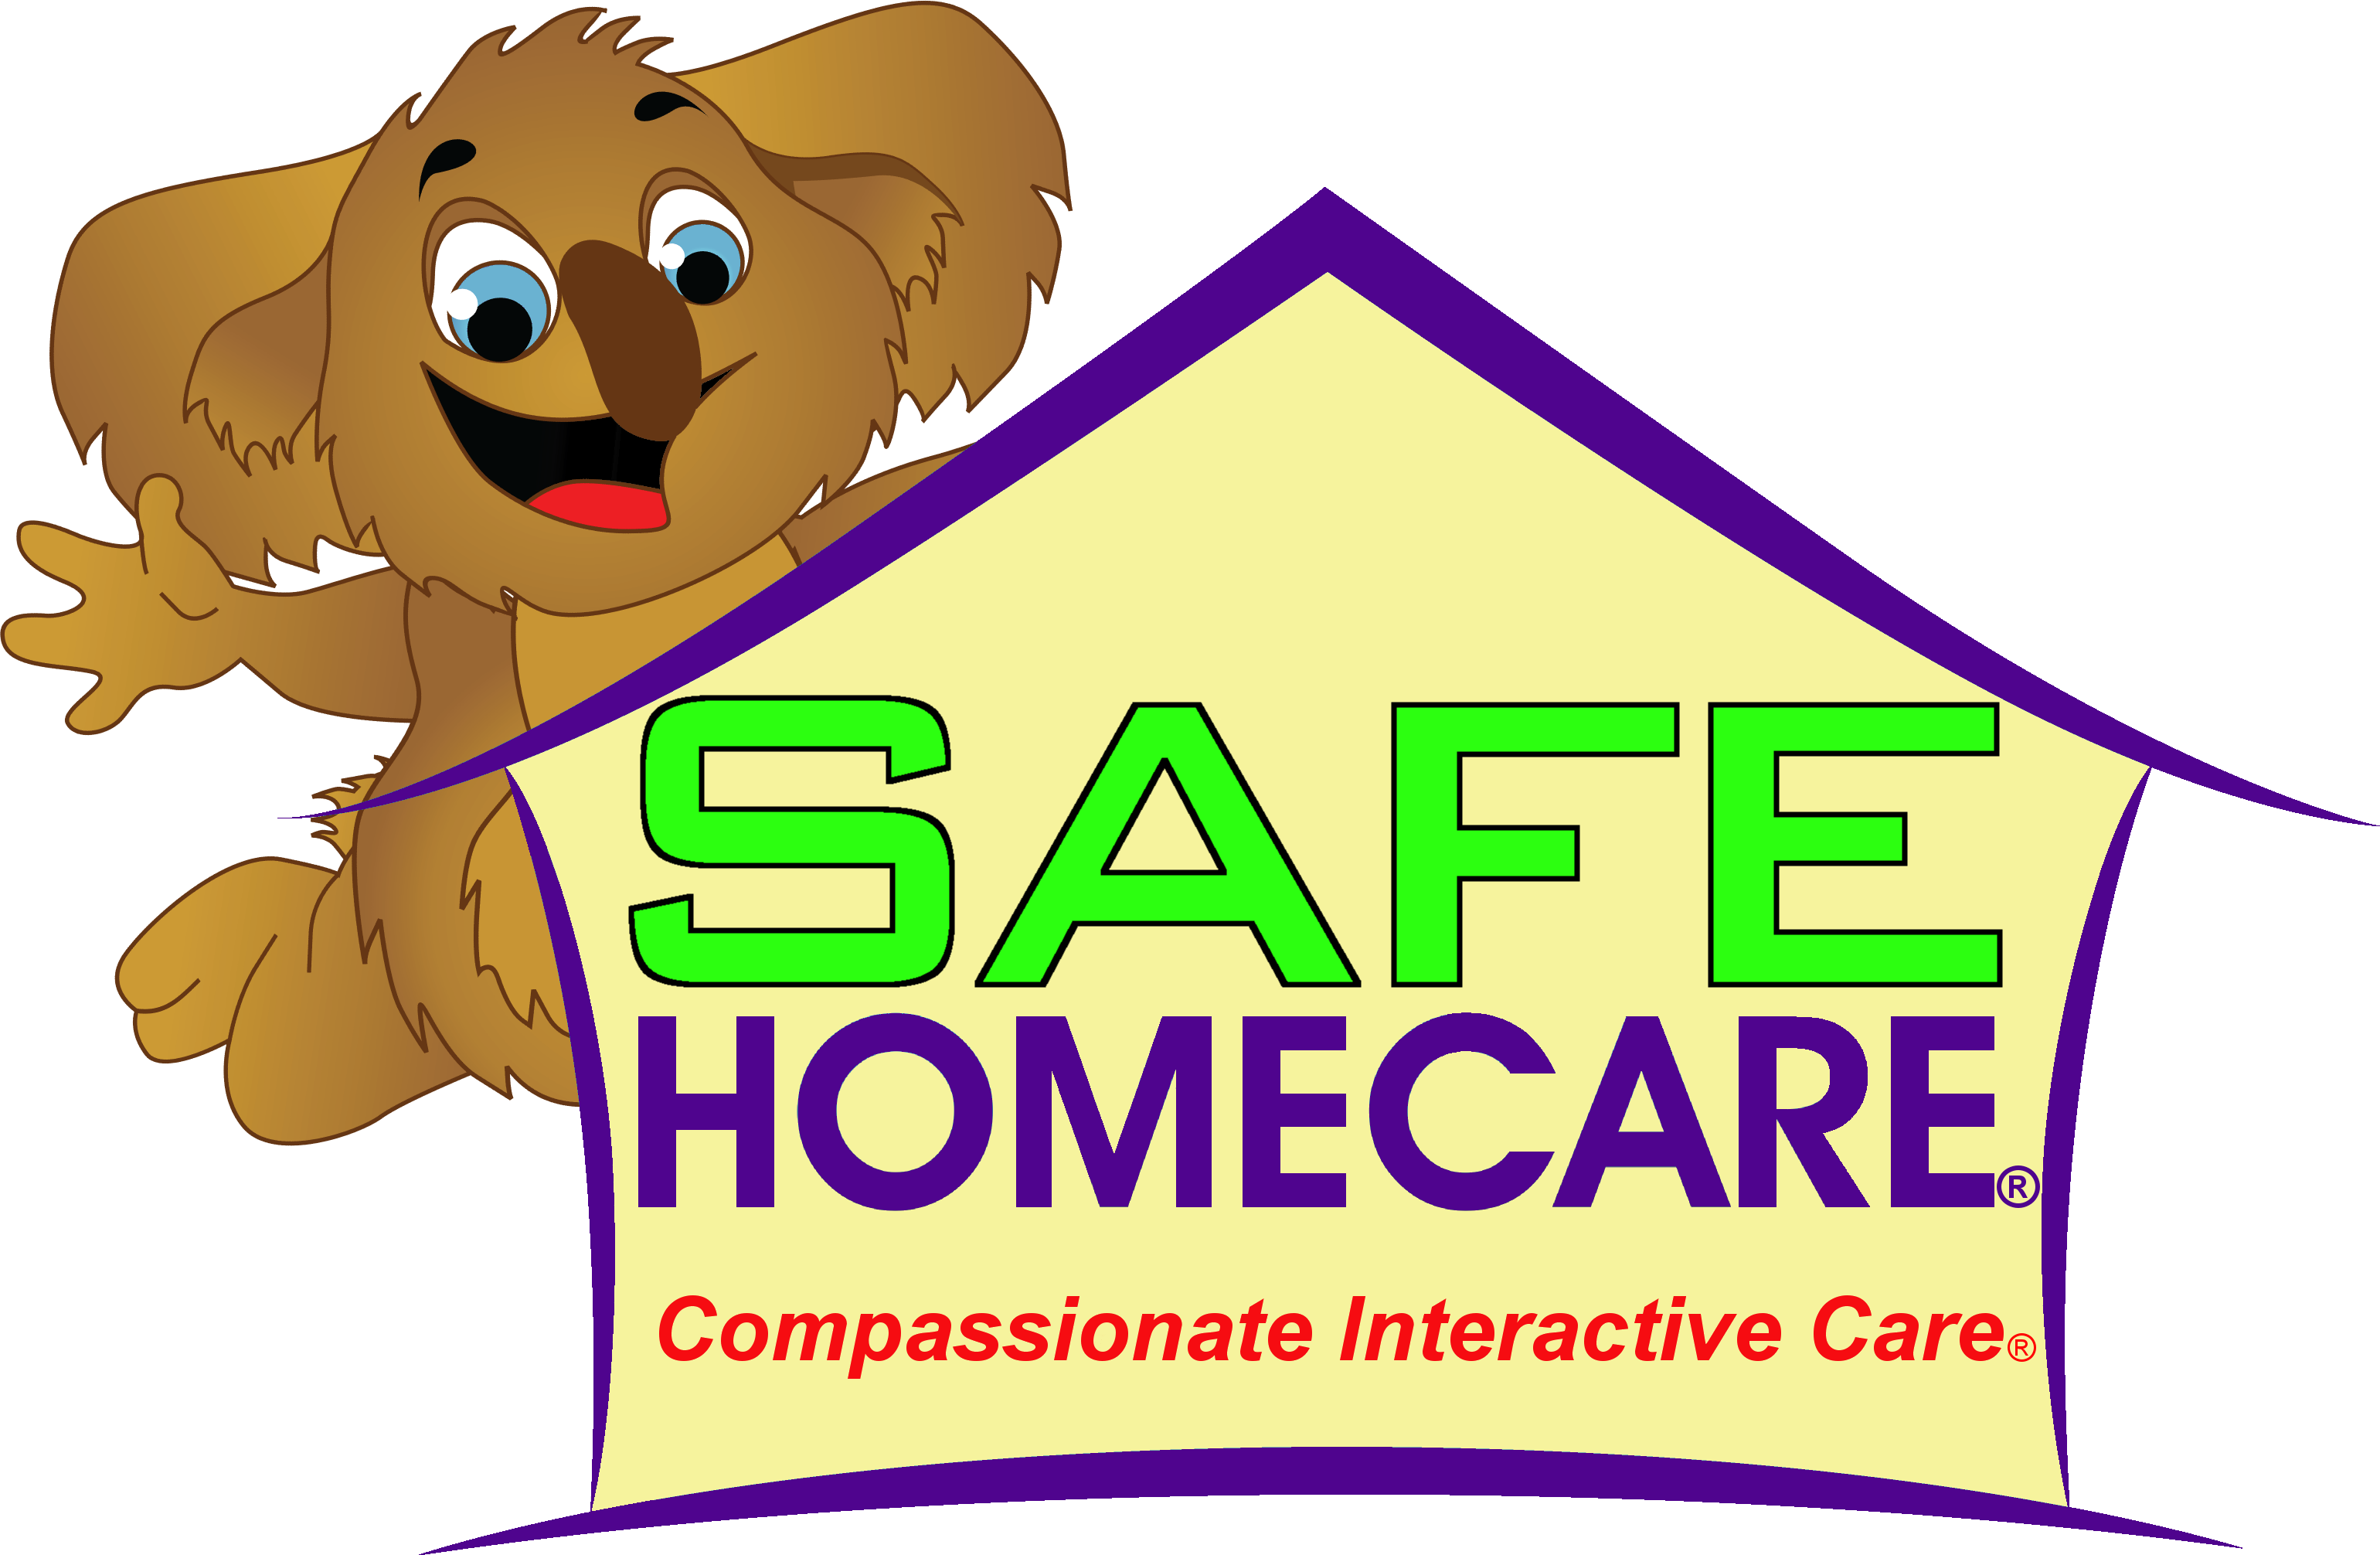 Krueger Recognized The Emerging Need Of Seniors And - Safe Homecare (3080x2012)